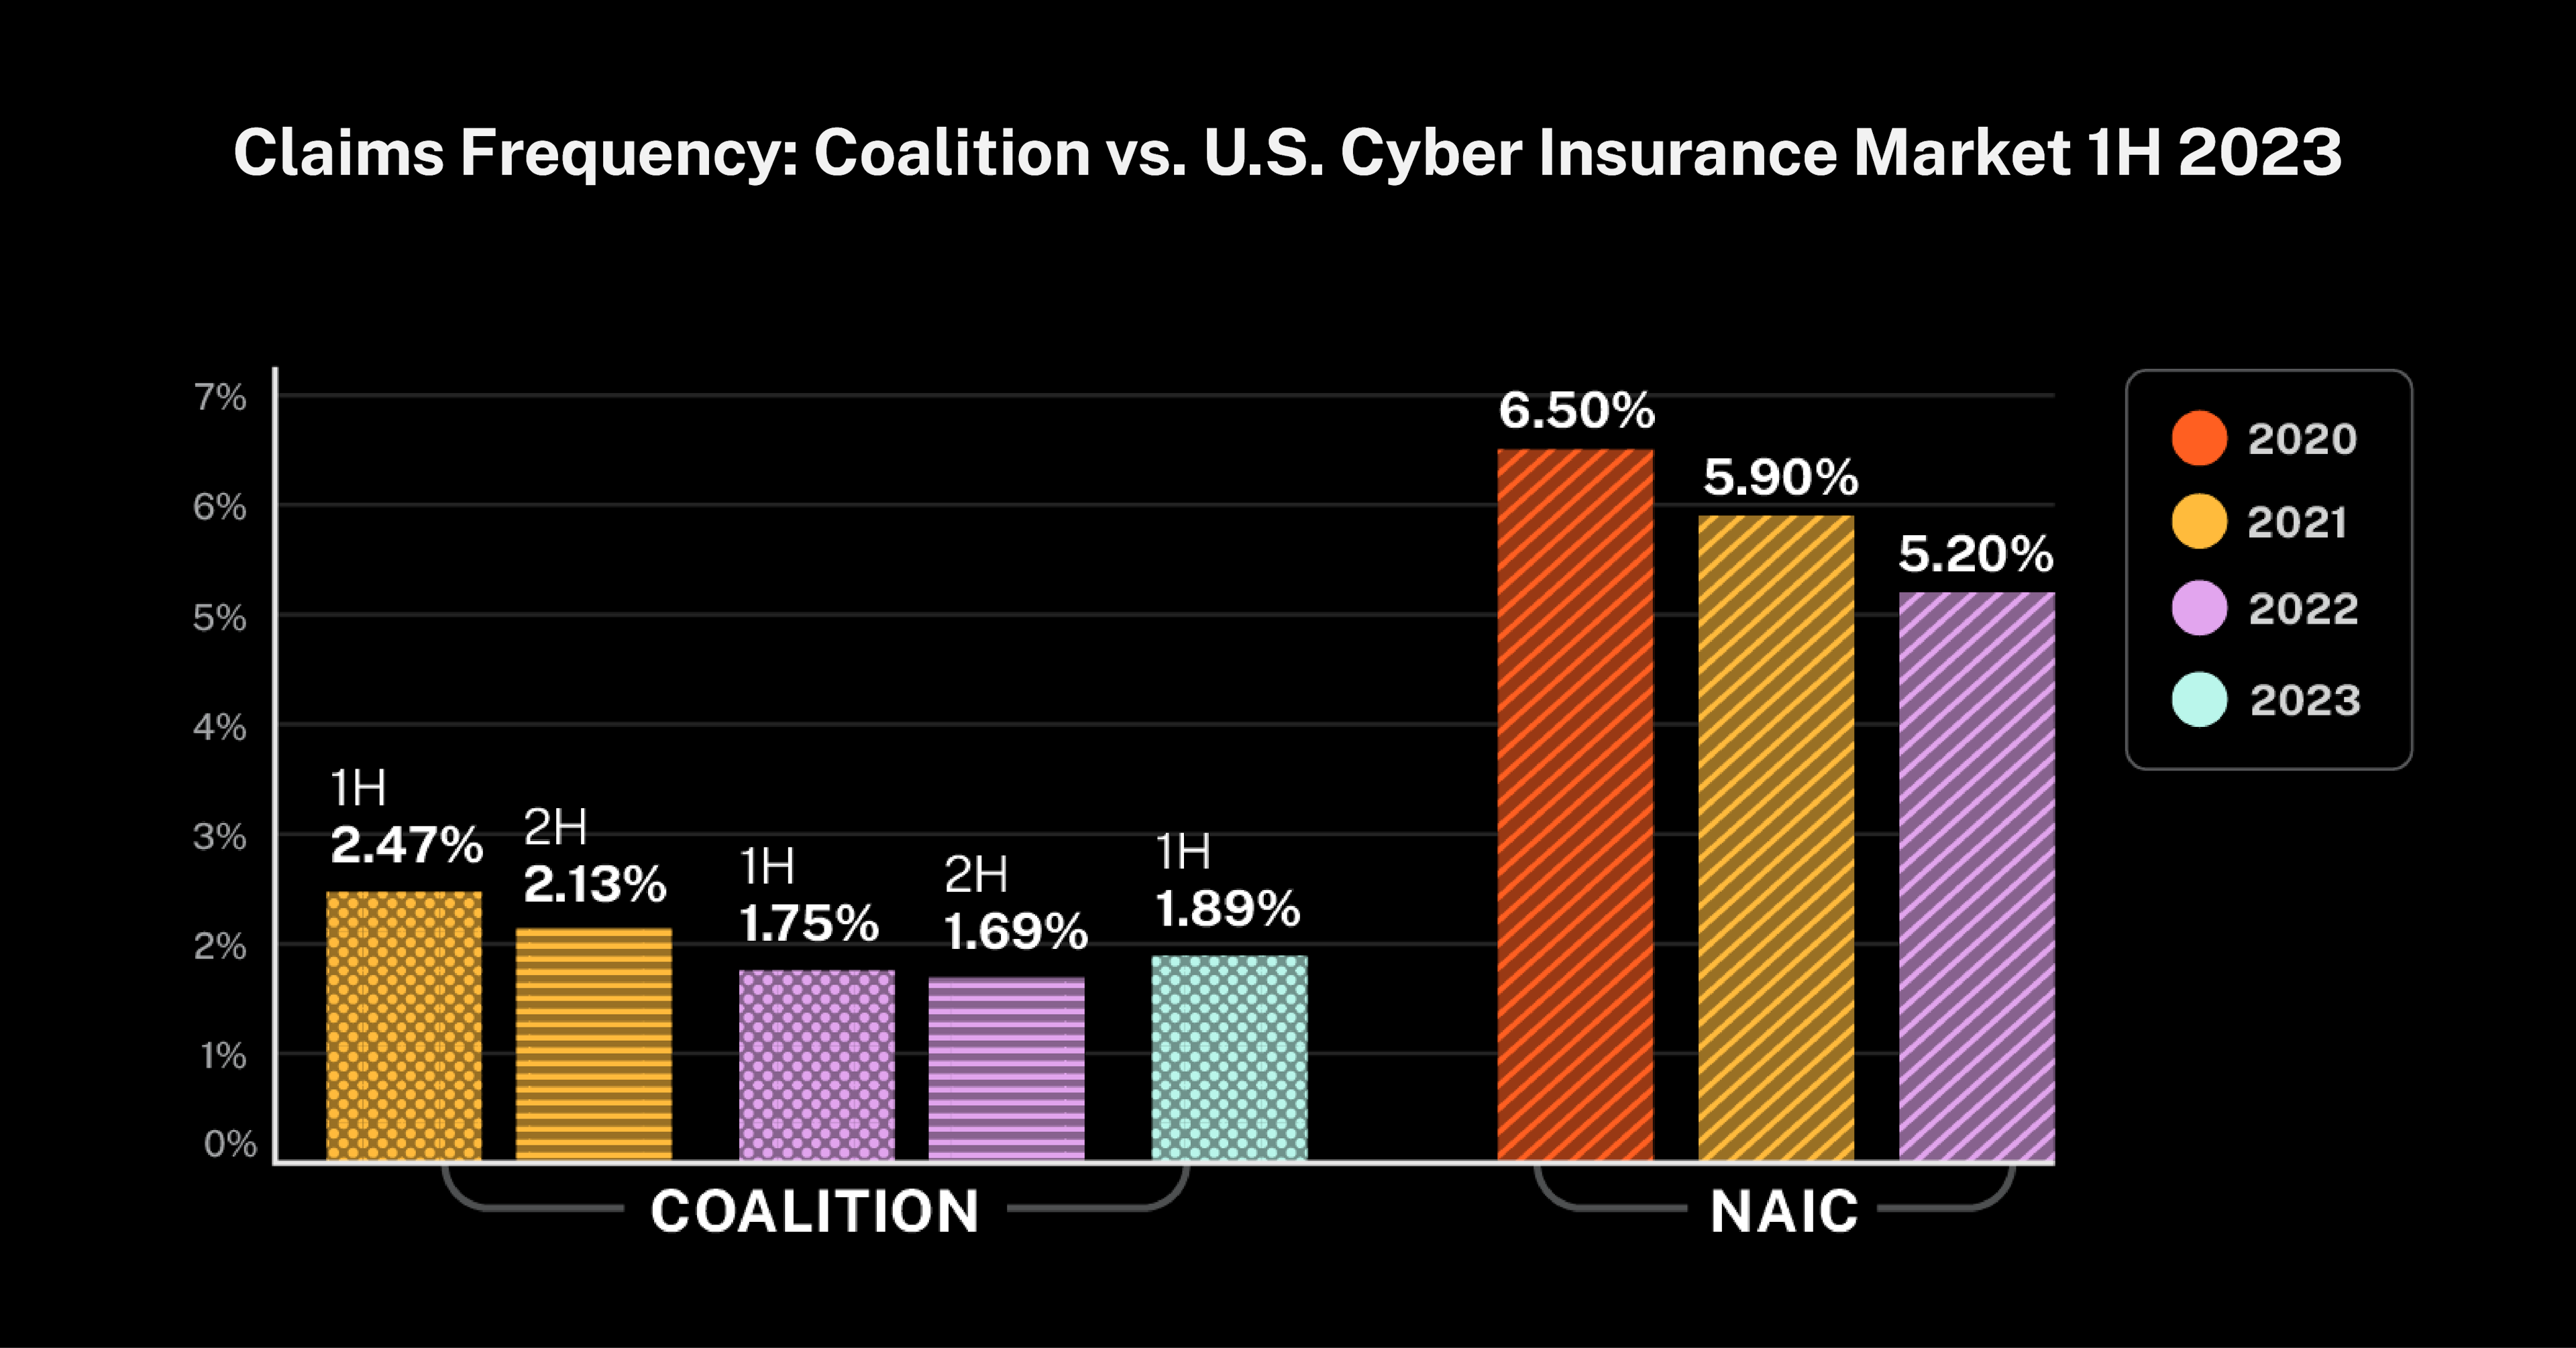 Blog Claims Frequency: Coalition vs. U.S. Cyber Insurance Market 1H 2023